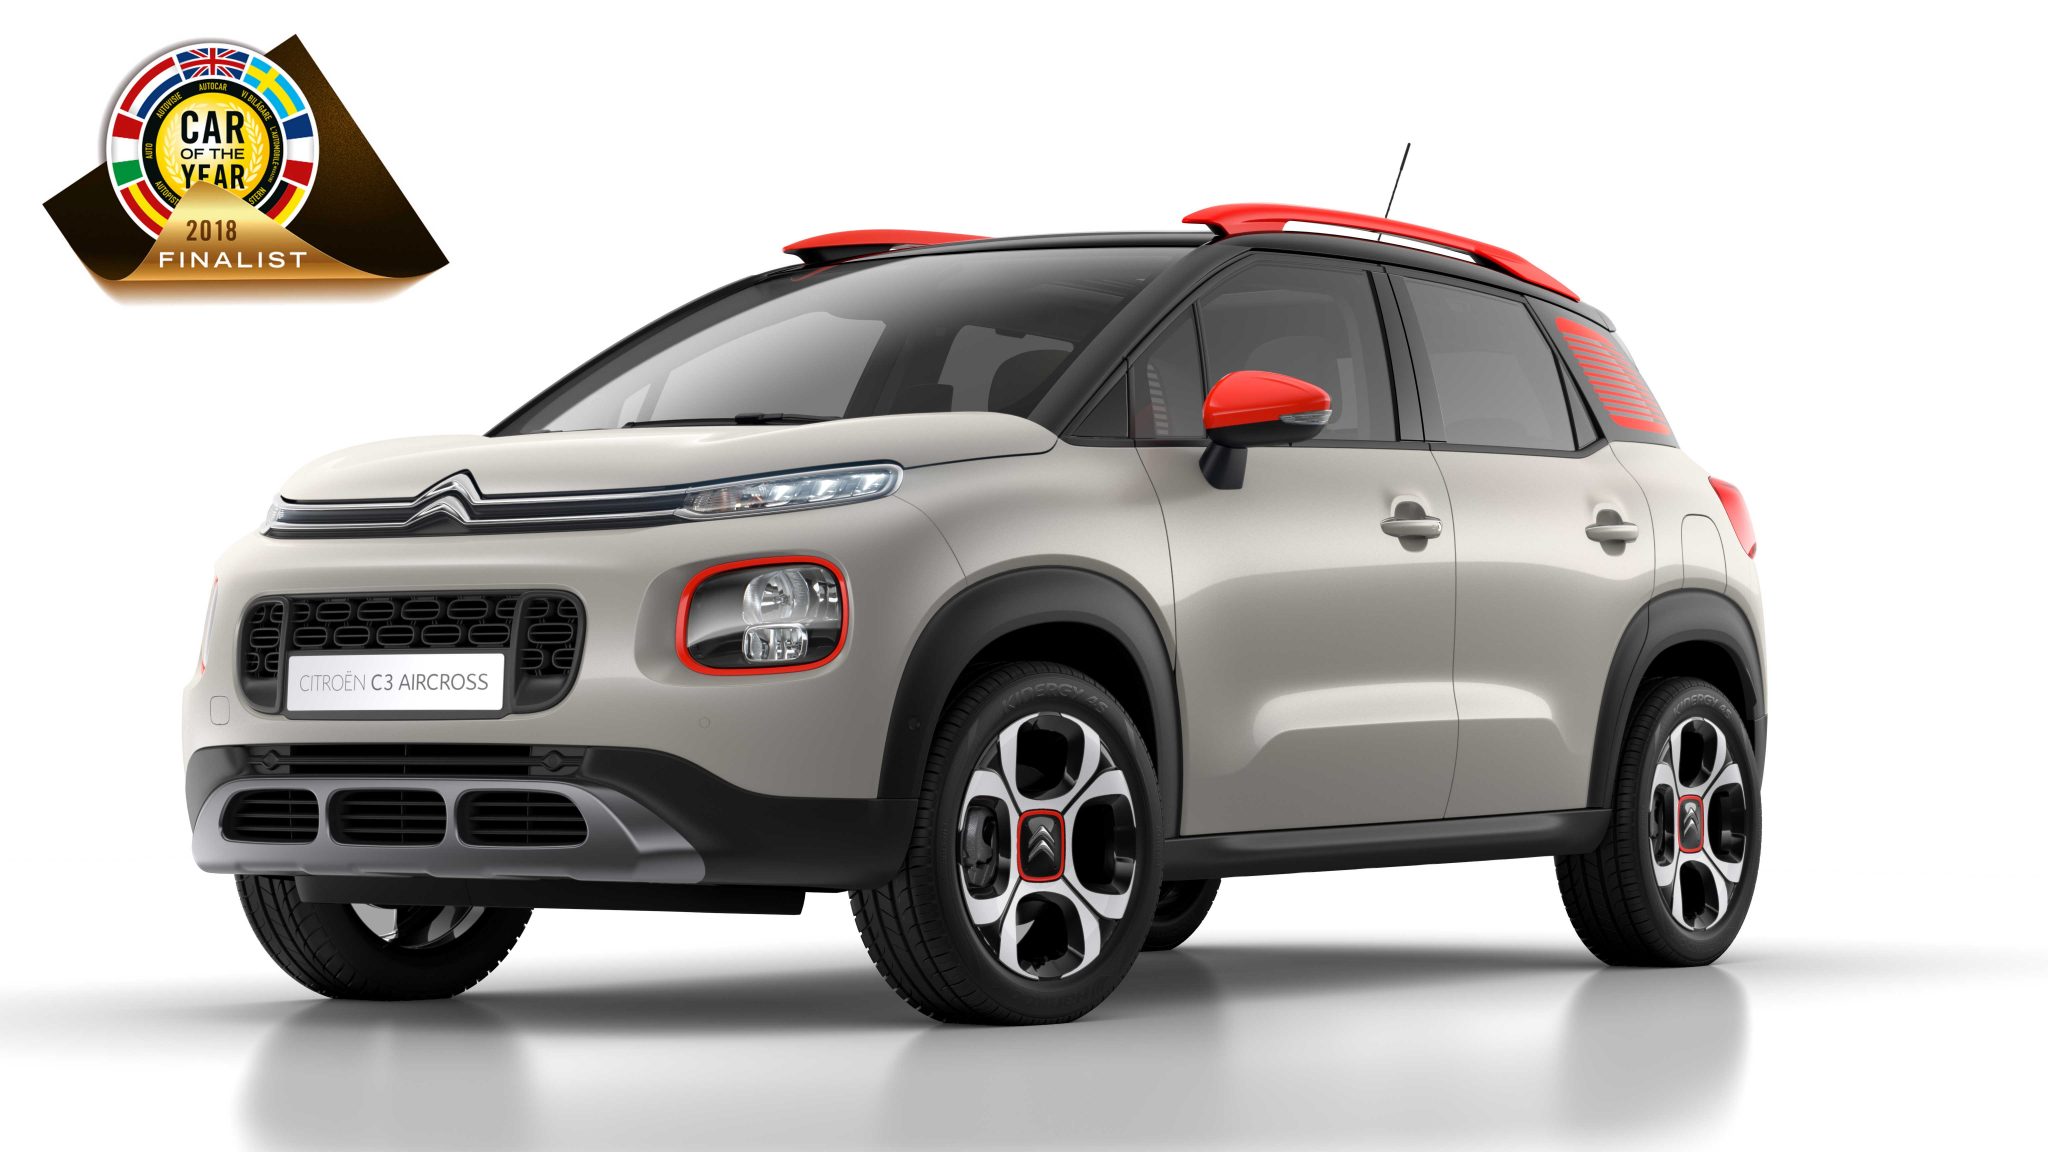 Crossover C3 Aircross